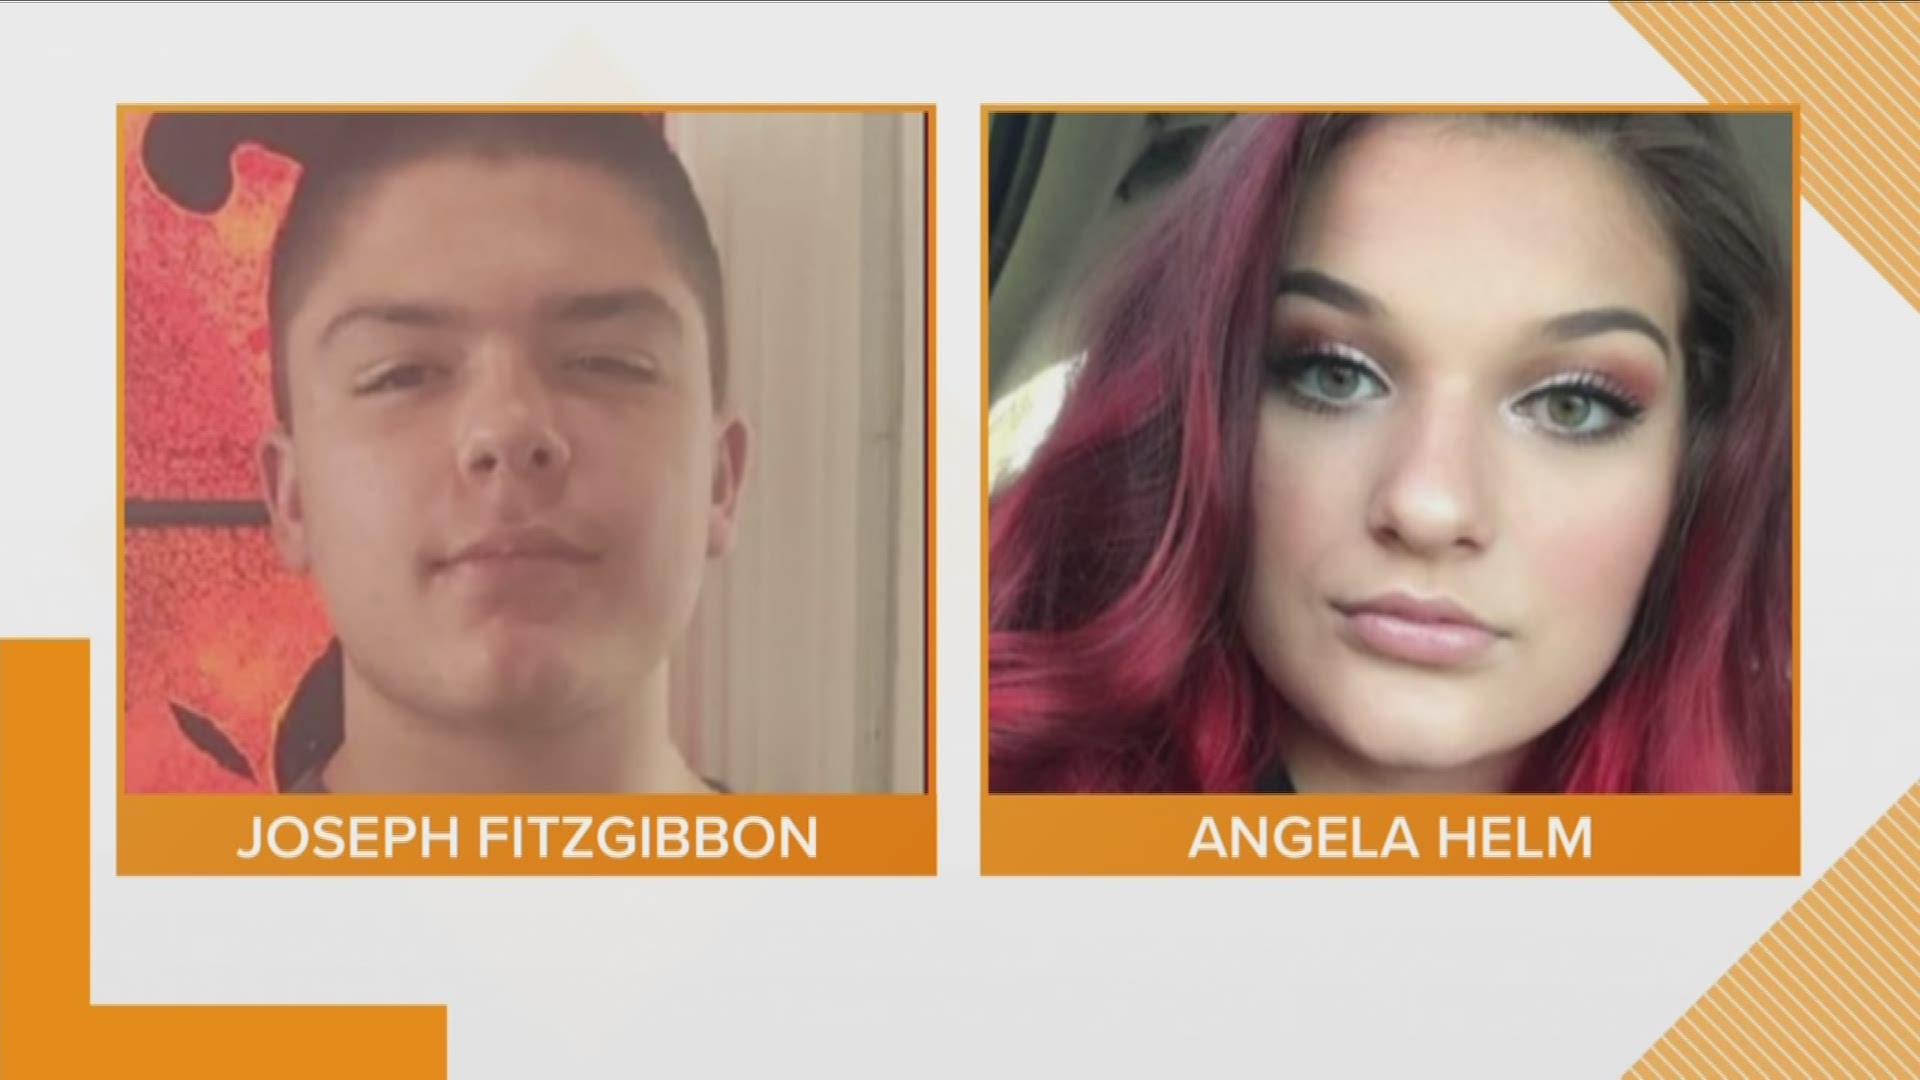 15-year-old Joseph Fitzgibbon and 17-year-old Angela Helm are both from Memphis but have ties to East Tennessee.